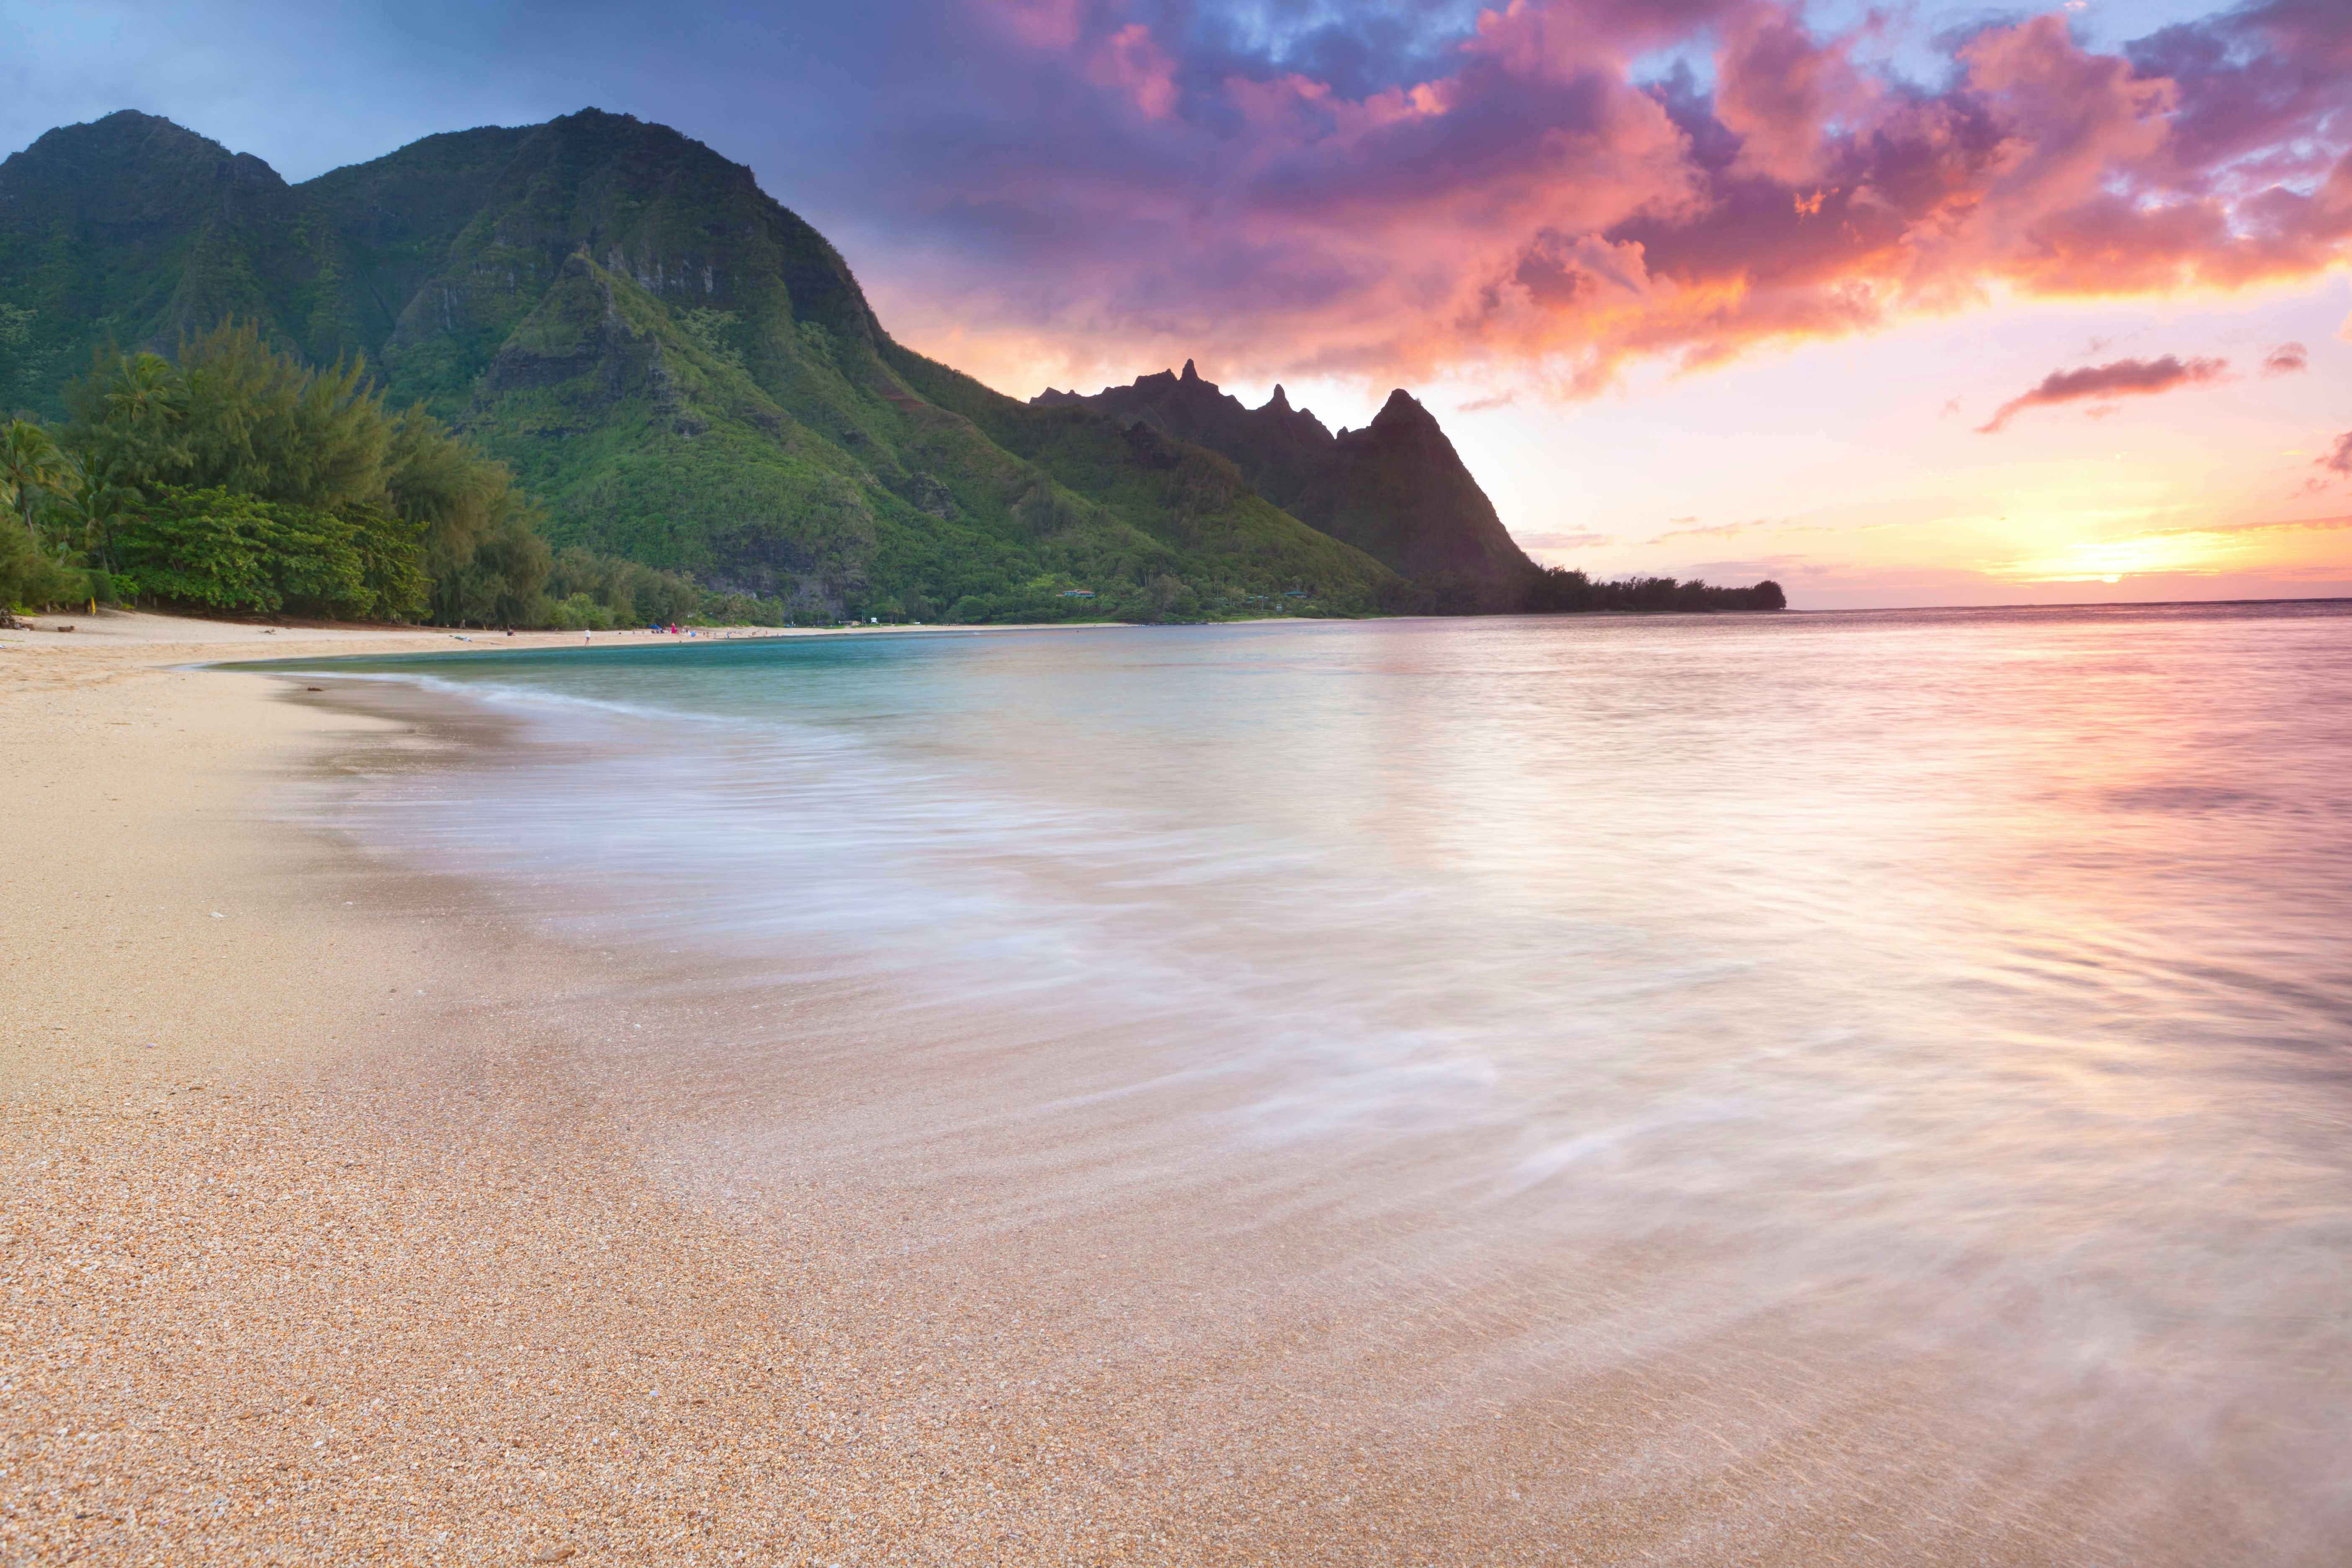 A US budget airline could make travel to Hawaii cheaper